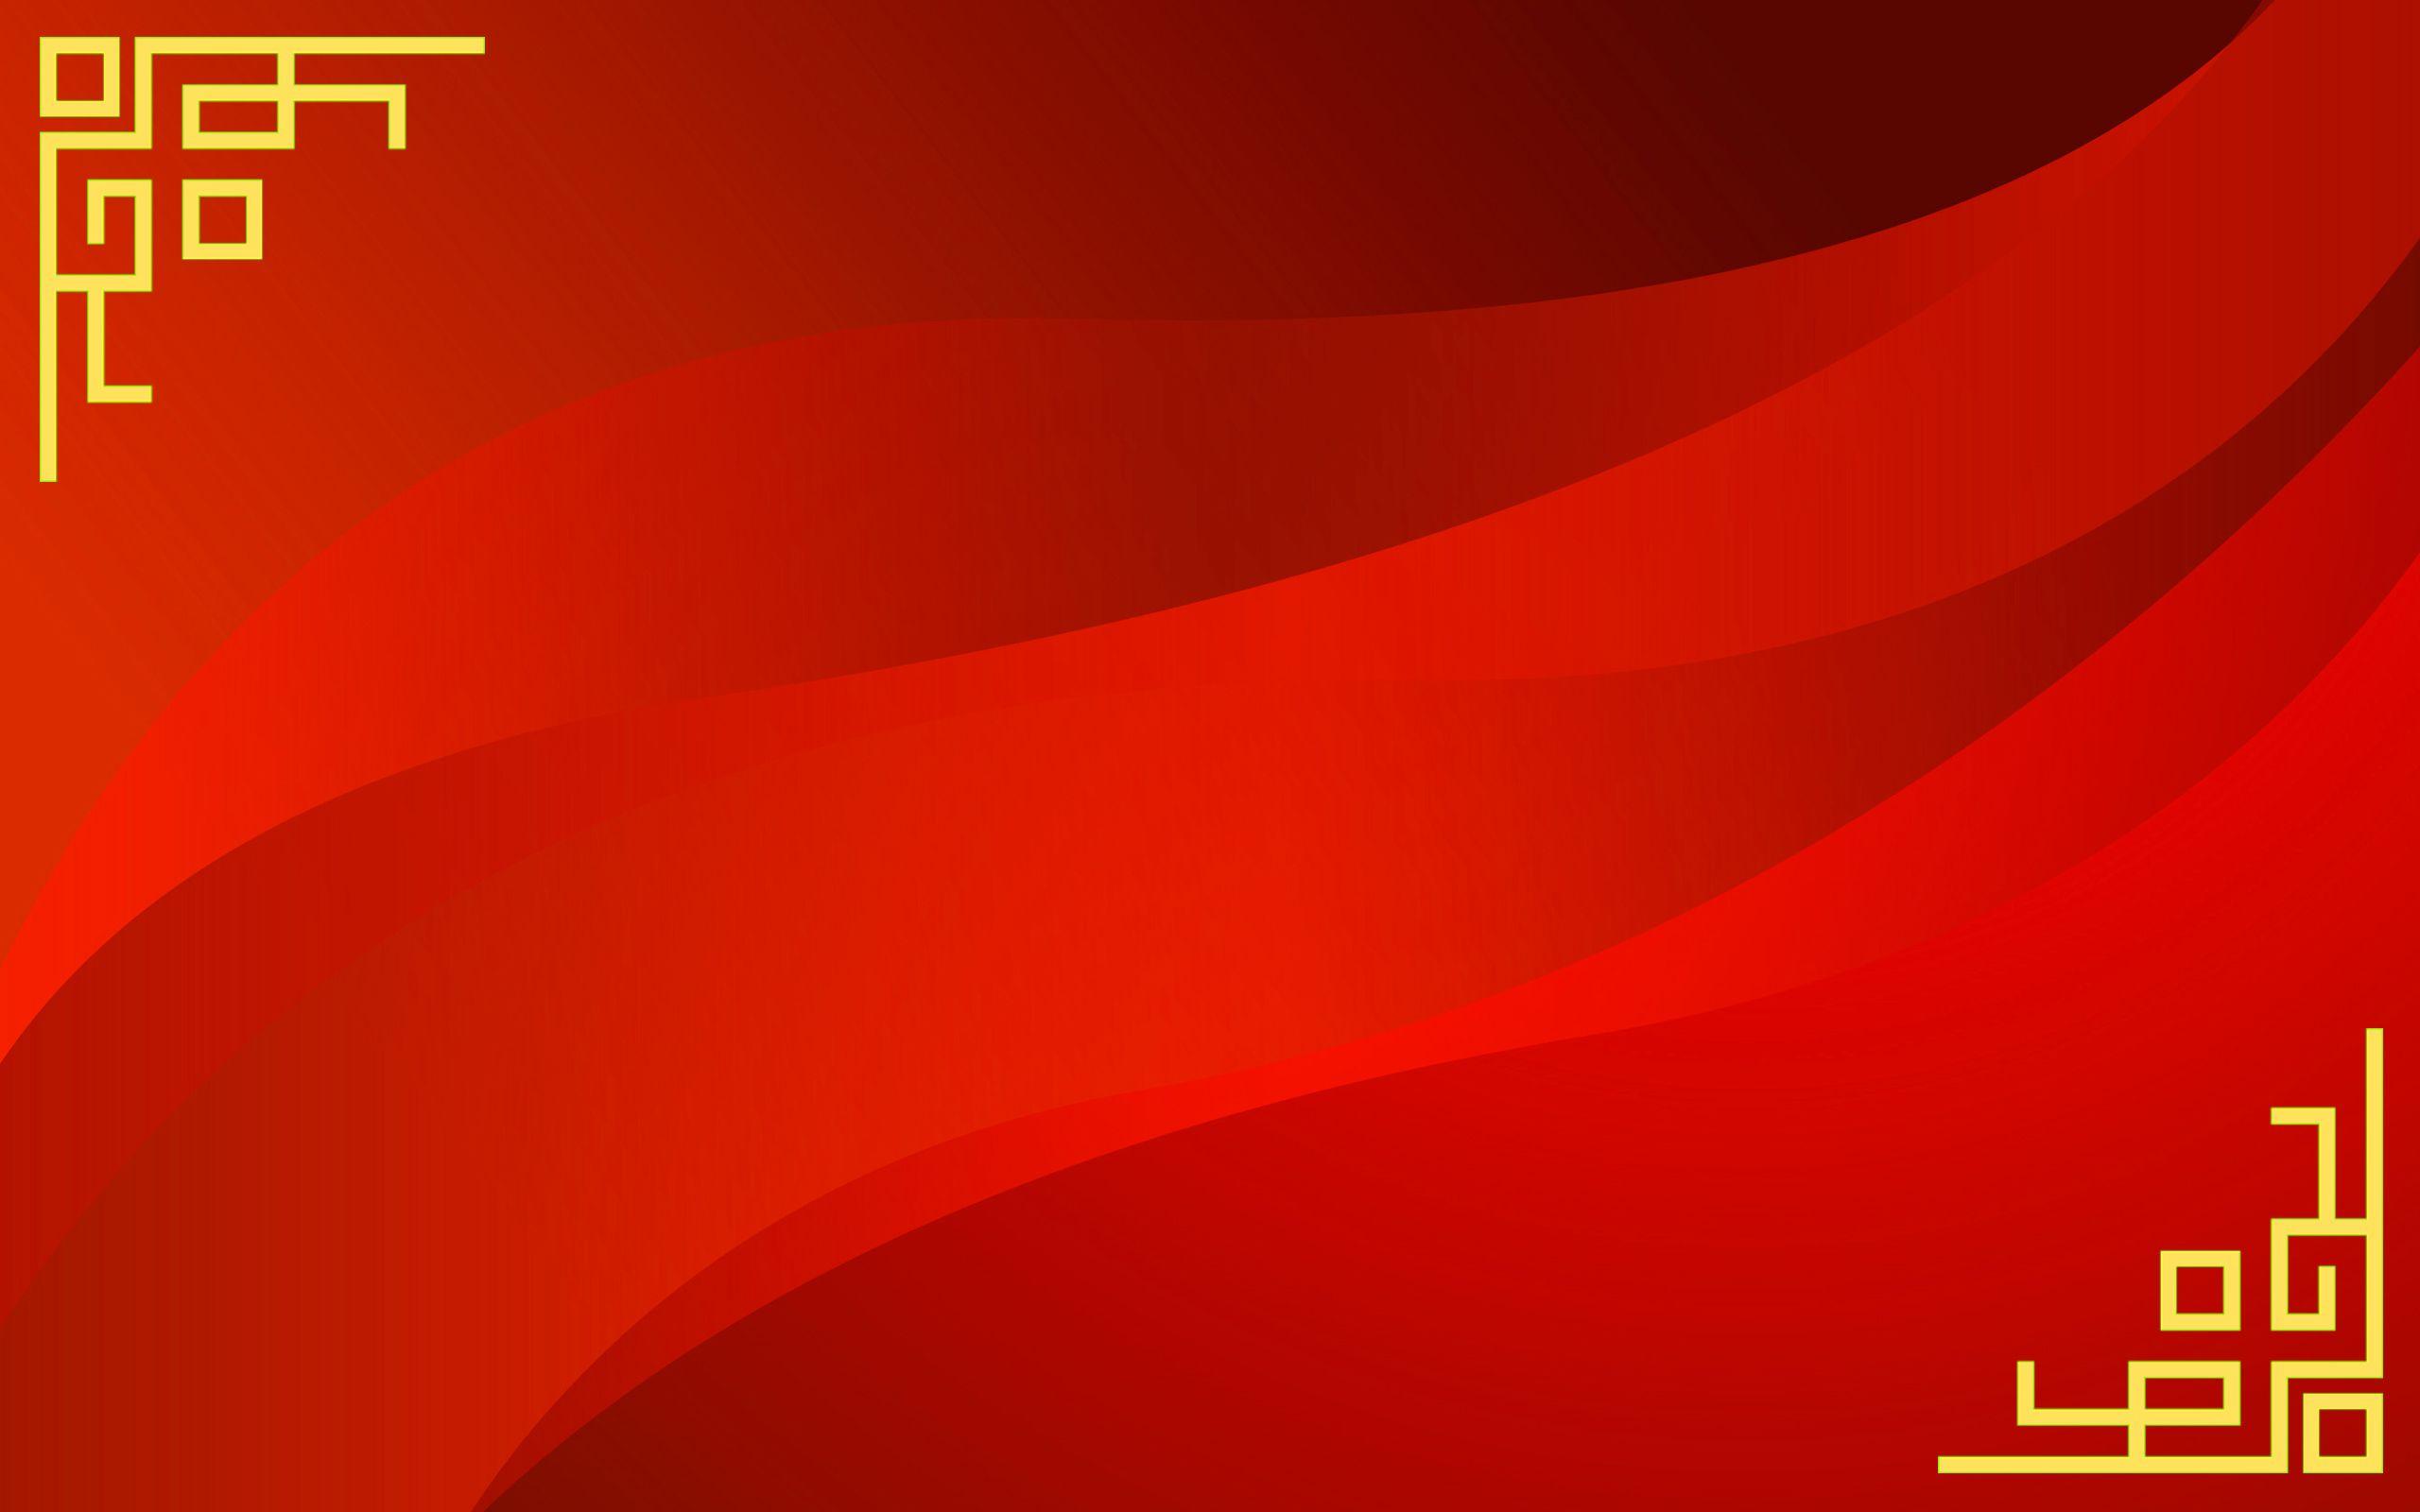 Red Chinese Wallpapers